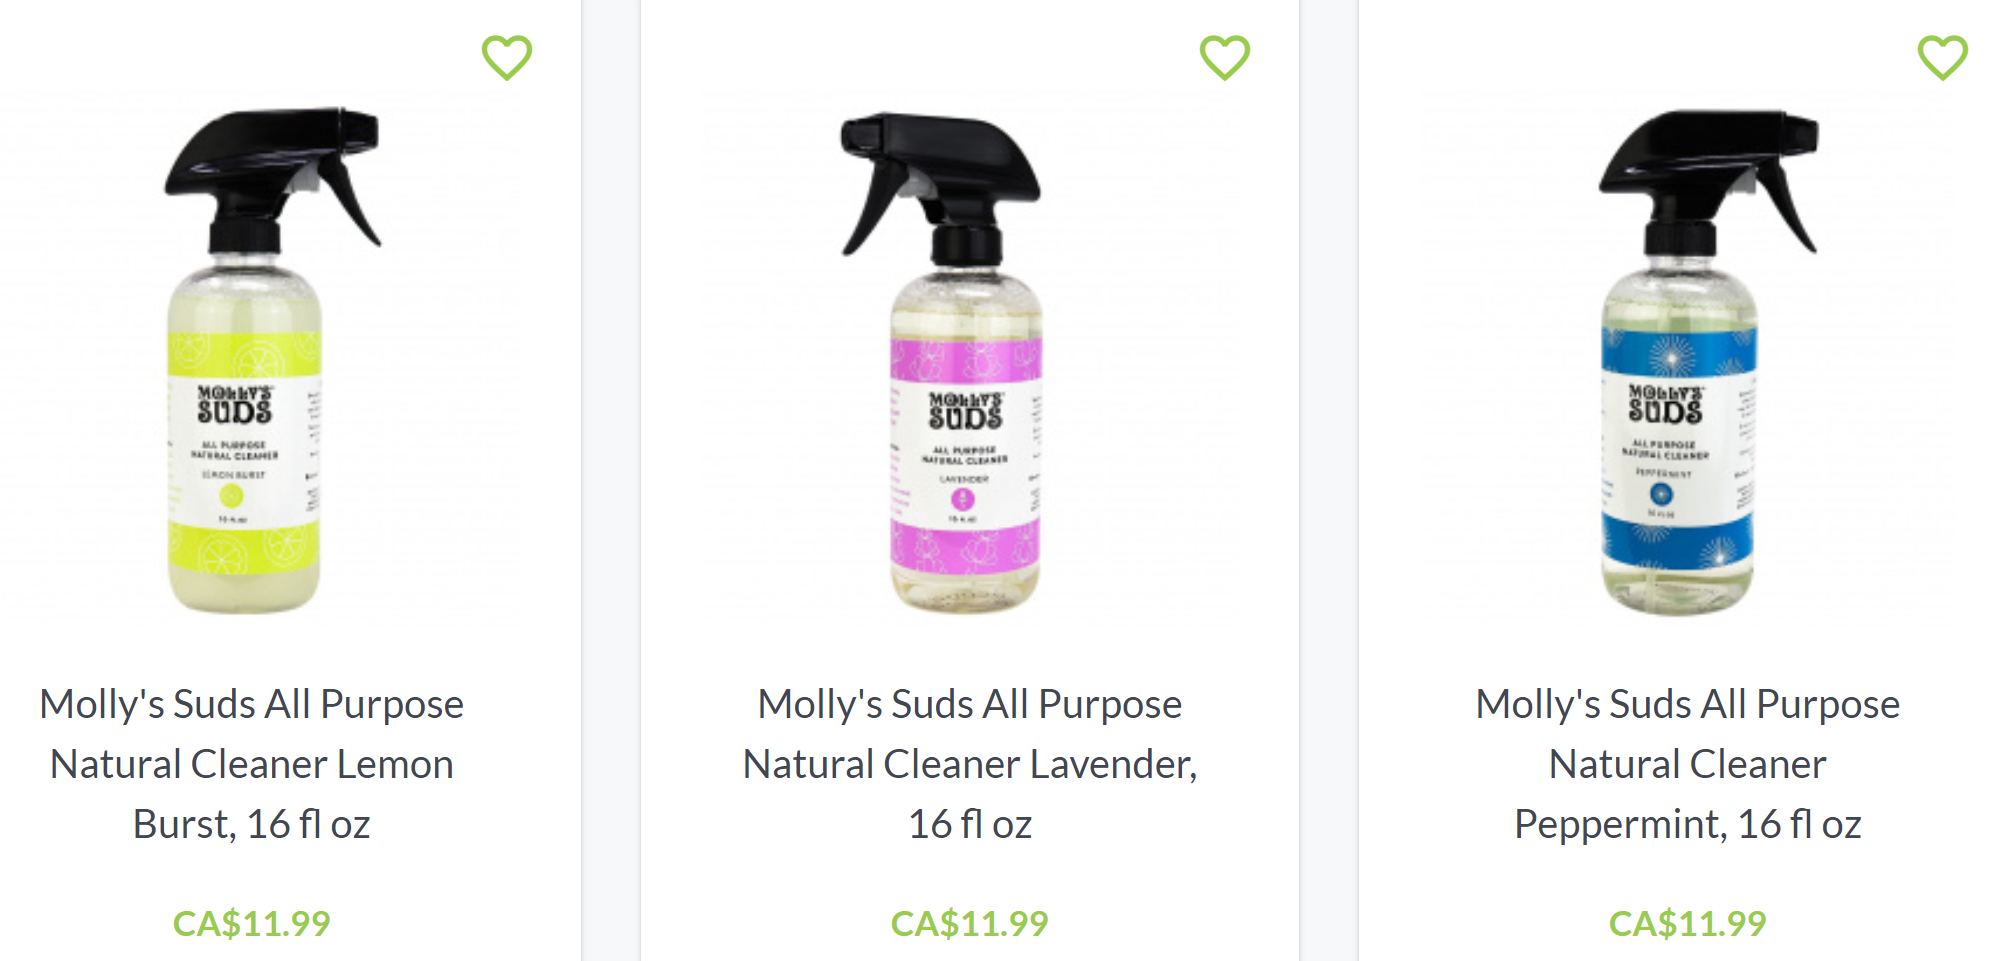 mollys-suds-natural-universal-cleaning-spray-1199-2020-8-12